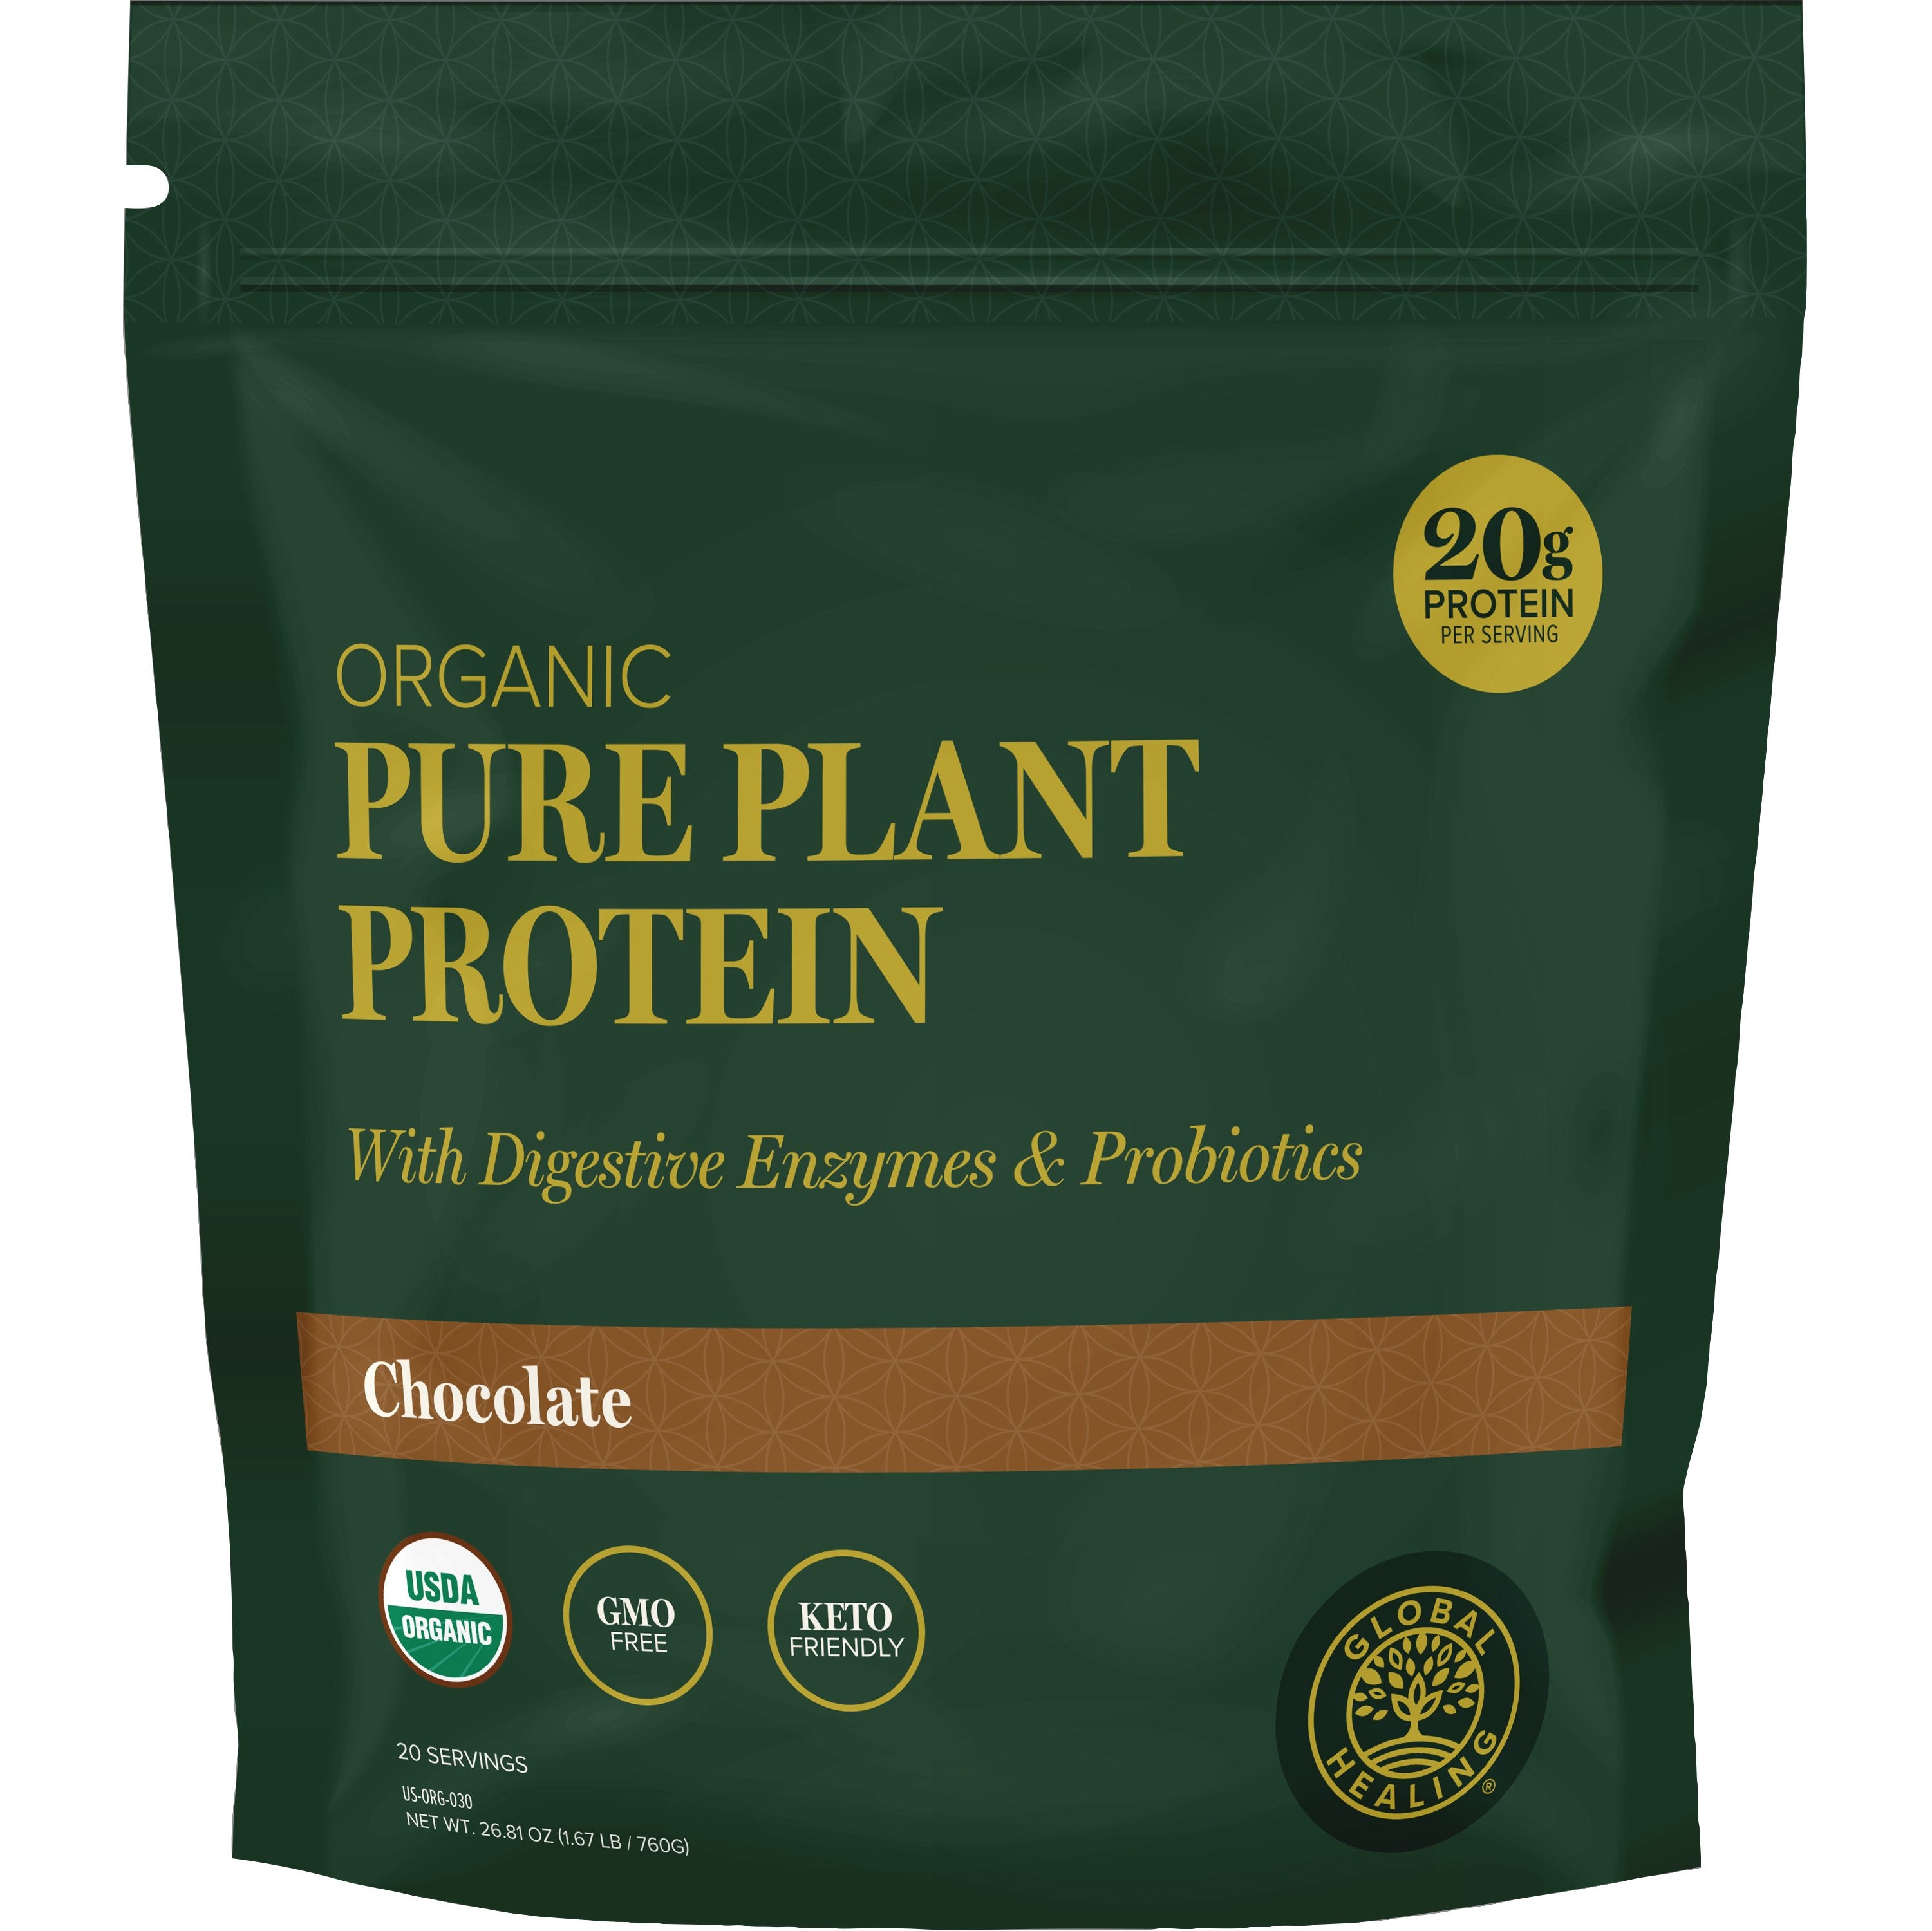 Organic Pure Plant Protein with Global Healing Benefits, Chocolate-infused with Advanced Digestive Enzymes & Probiotics.